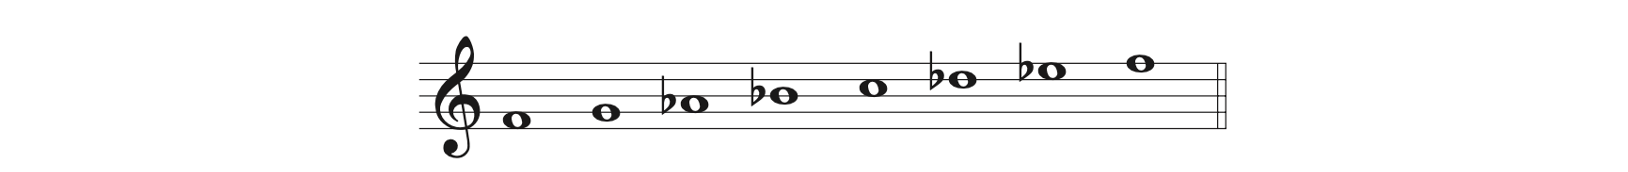 Ascending natural minor scale beginning on F4.